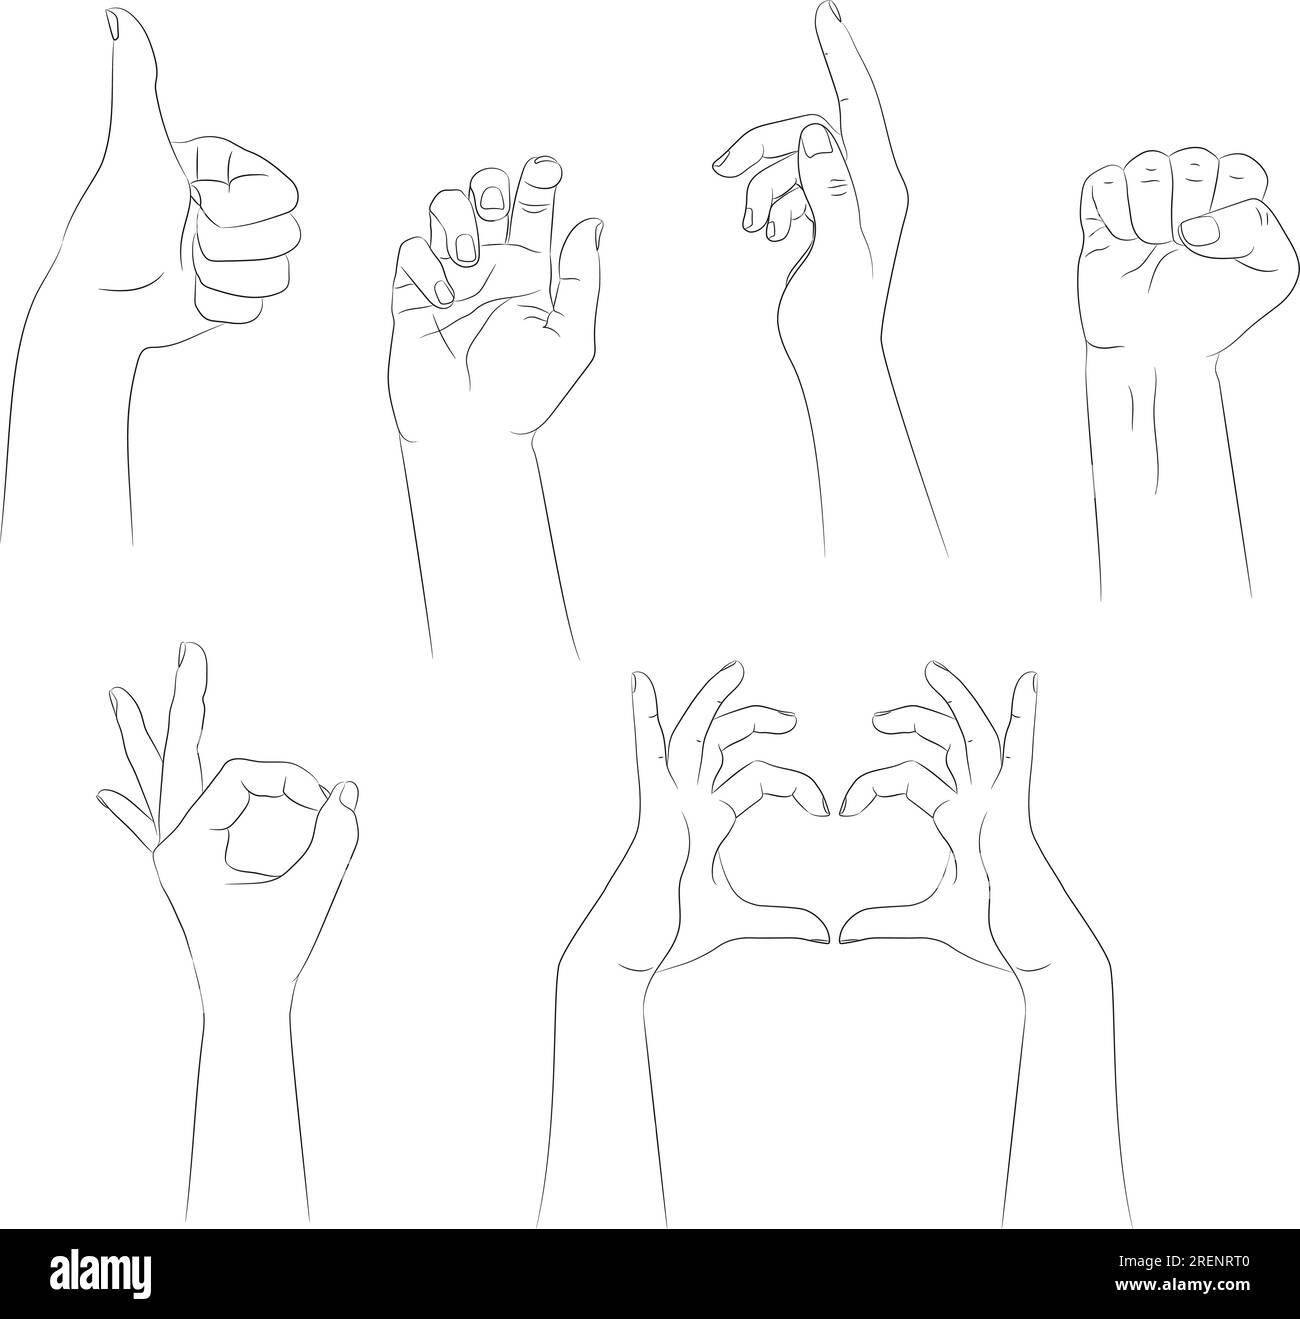 Set of hand drawn human hands with different gestures. Hand outline with an empty contour isolated on white background. Vector illustration Stock Vector